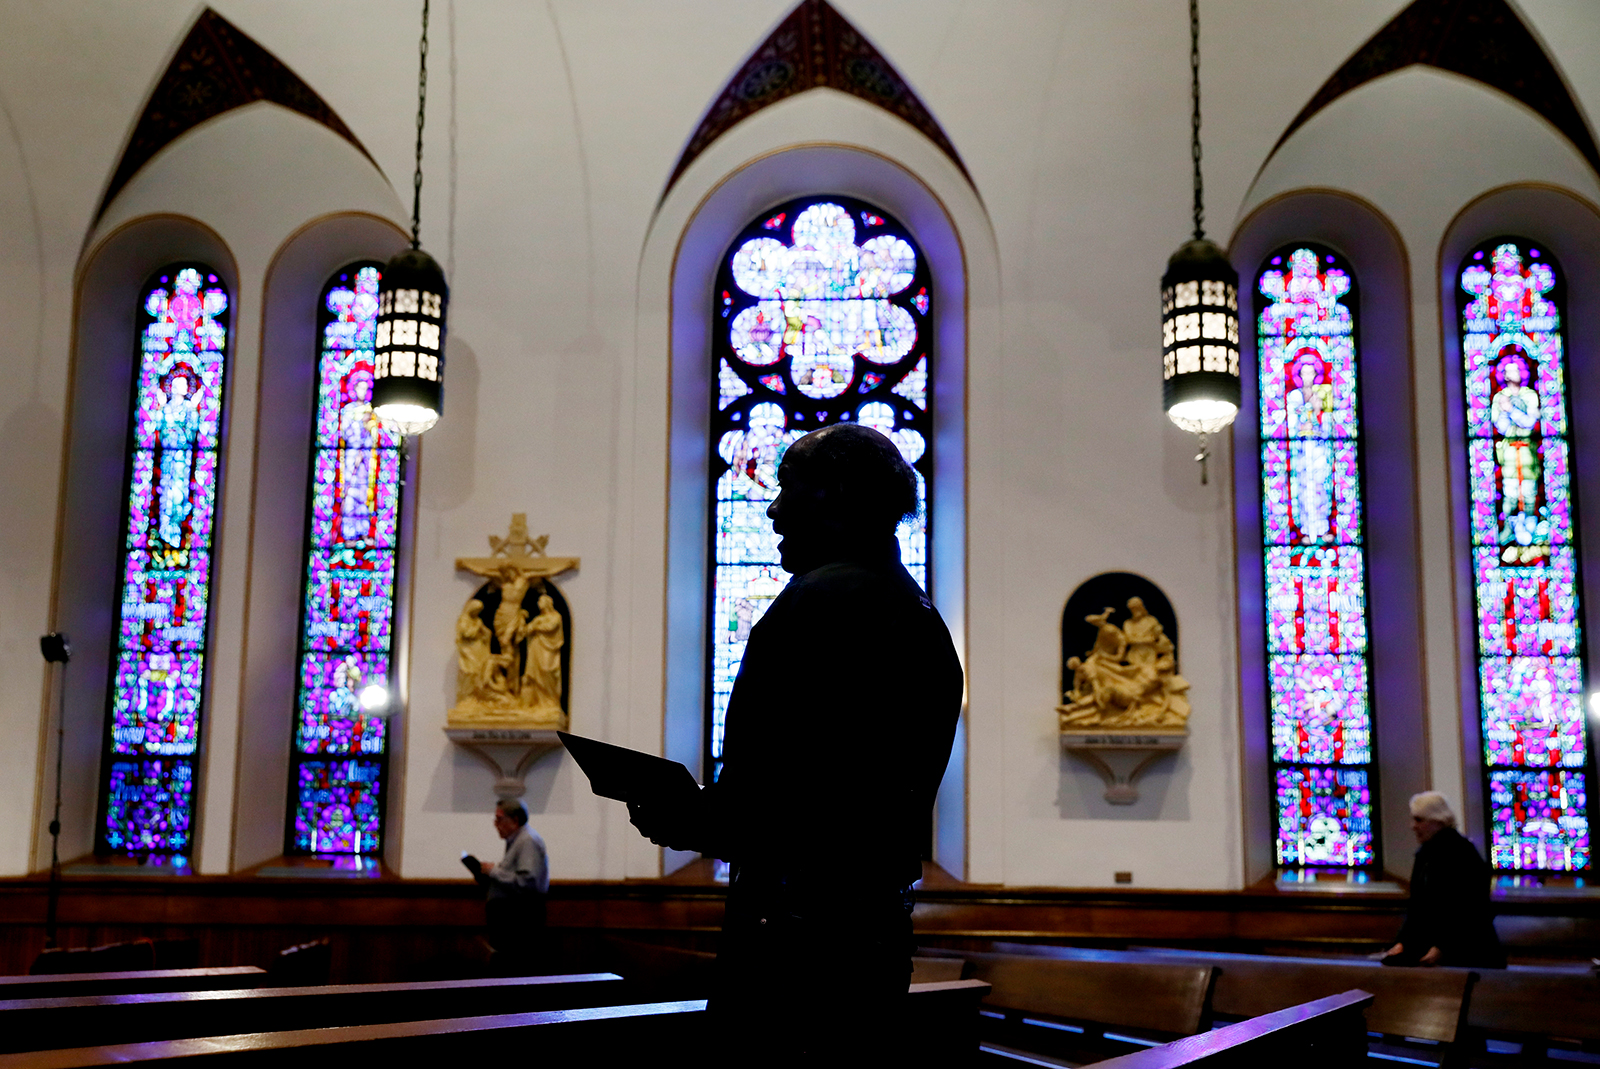 A church member prays during a Good Friday service at a church in Des Moines, Iowa on April 10.